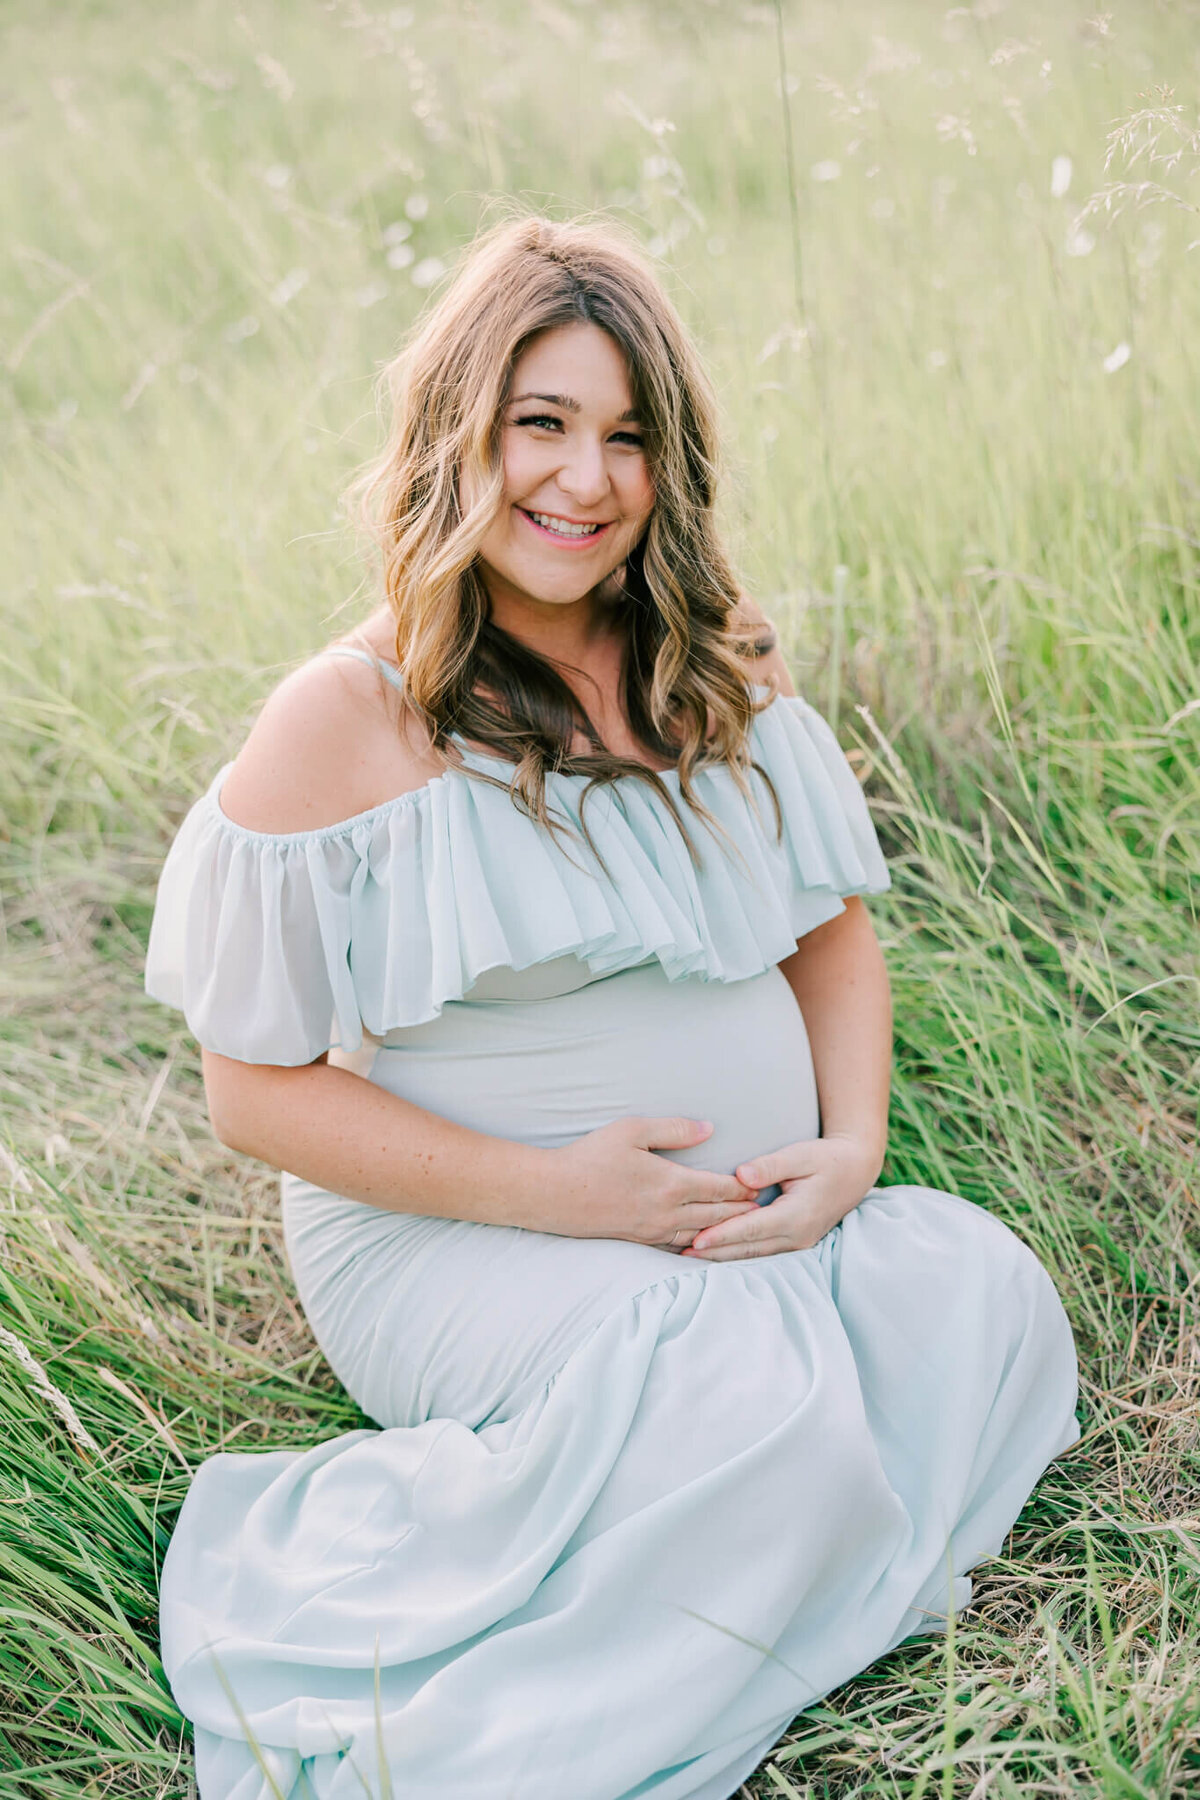 portrait of a woman smiling during her maternity photography session. She is smiling at the camera and wearing a green dress